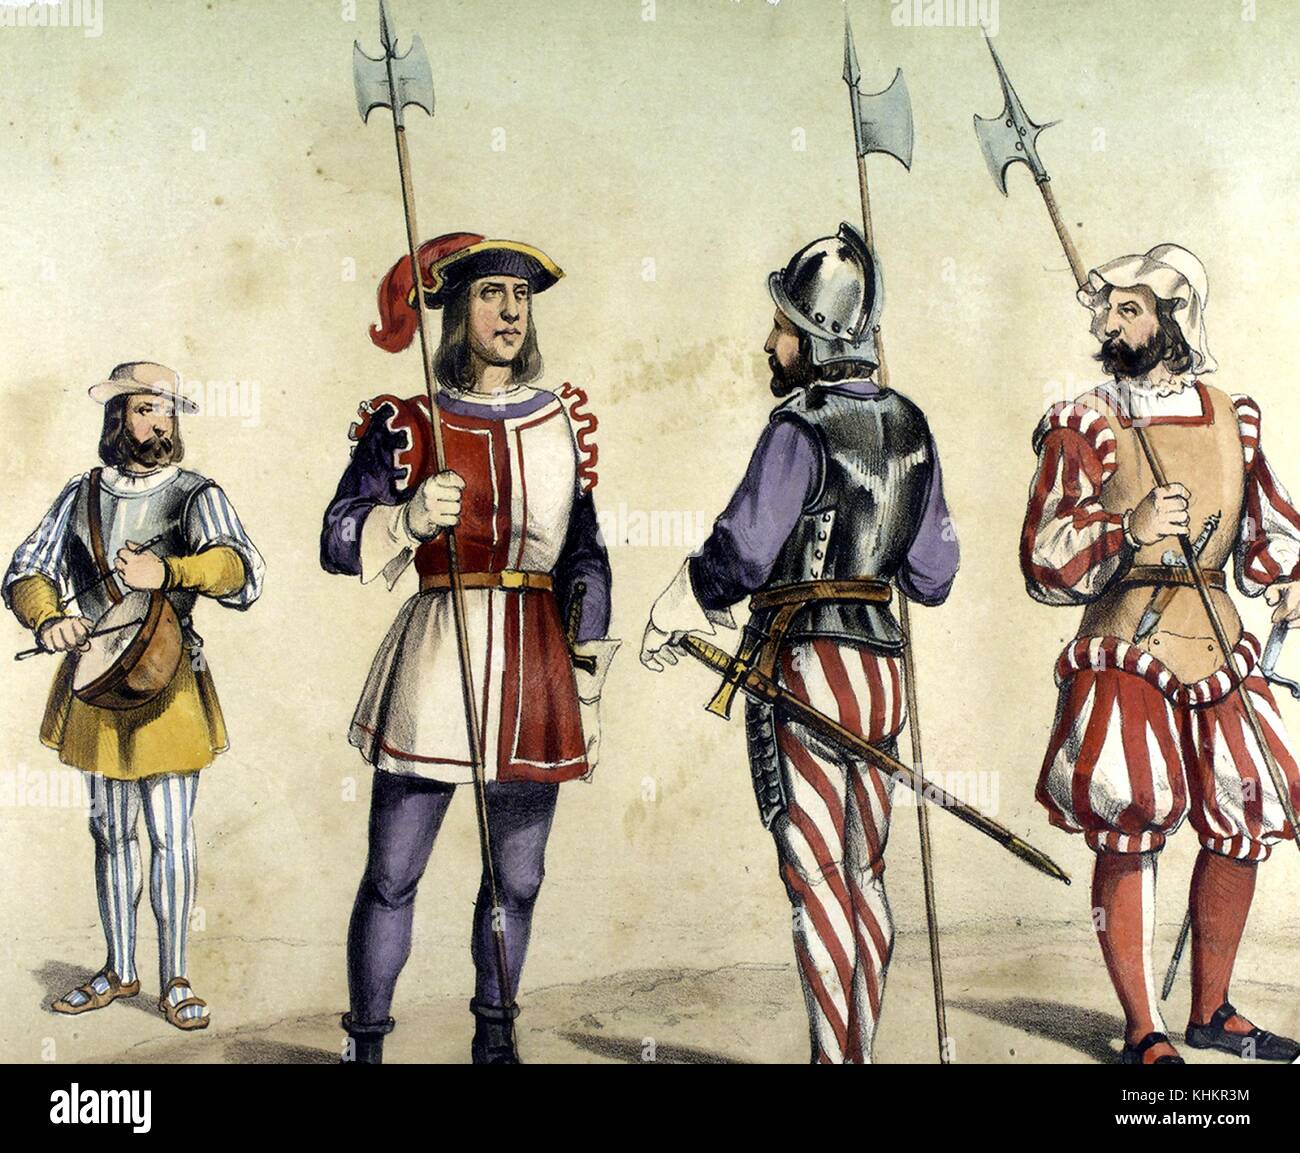 A color lithograph depicting four different classes of soldiers as they would have appeared in 1496, the three soldiers on the left are Spanish, the soldier on the left plays a kettledrum and wears chest armor, the second soldier wearing a red and white tunic is a guard, the third soldier is a Beefeater charged with guarding the king on any of his expeditions, the soldier on the right is a German mercenary who would have been fighting for the Spanish at this time, 1861. From the New York Public Library. Stock Photo